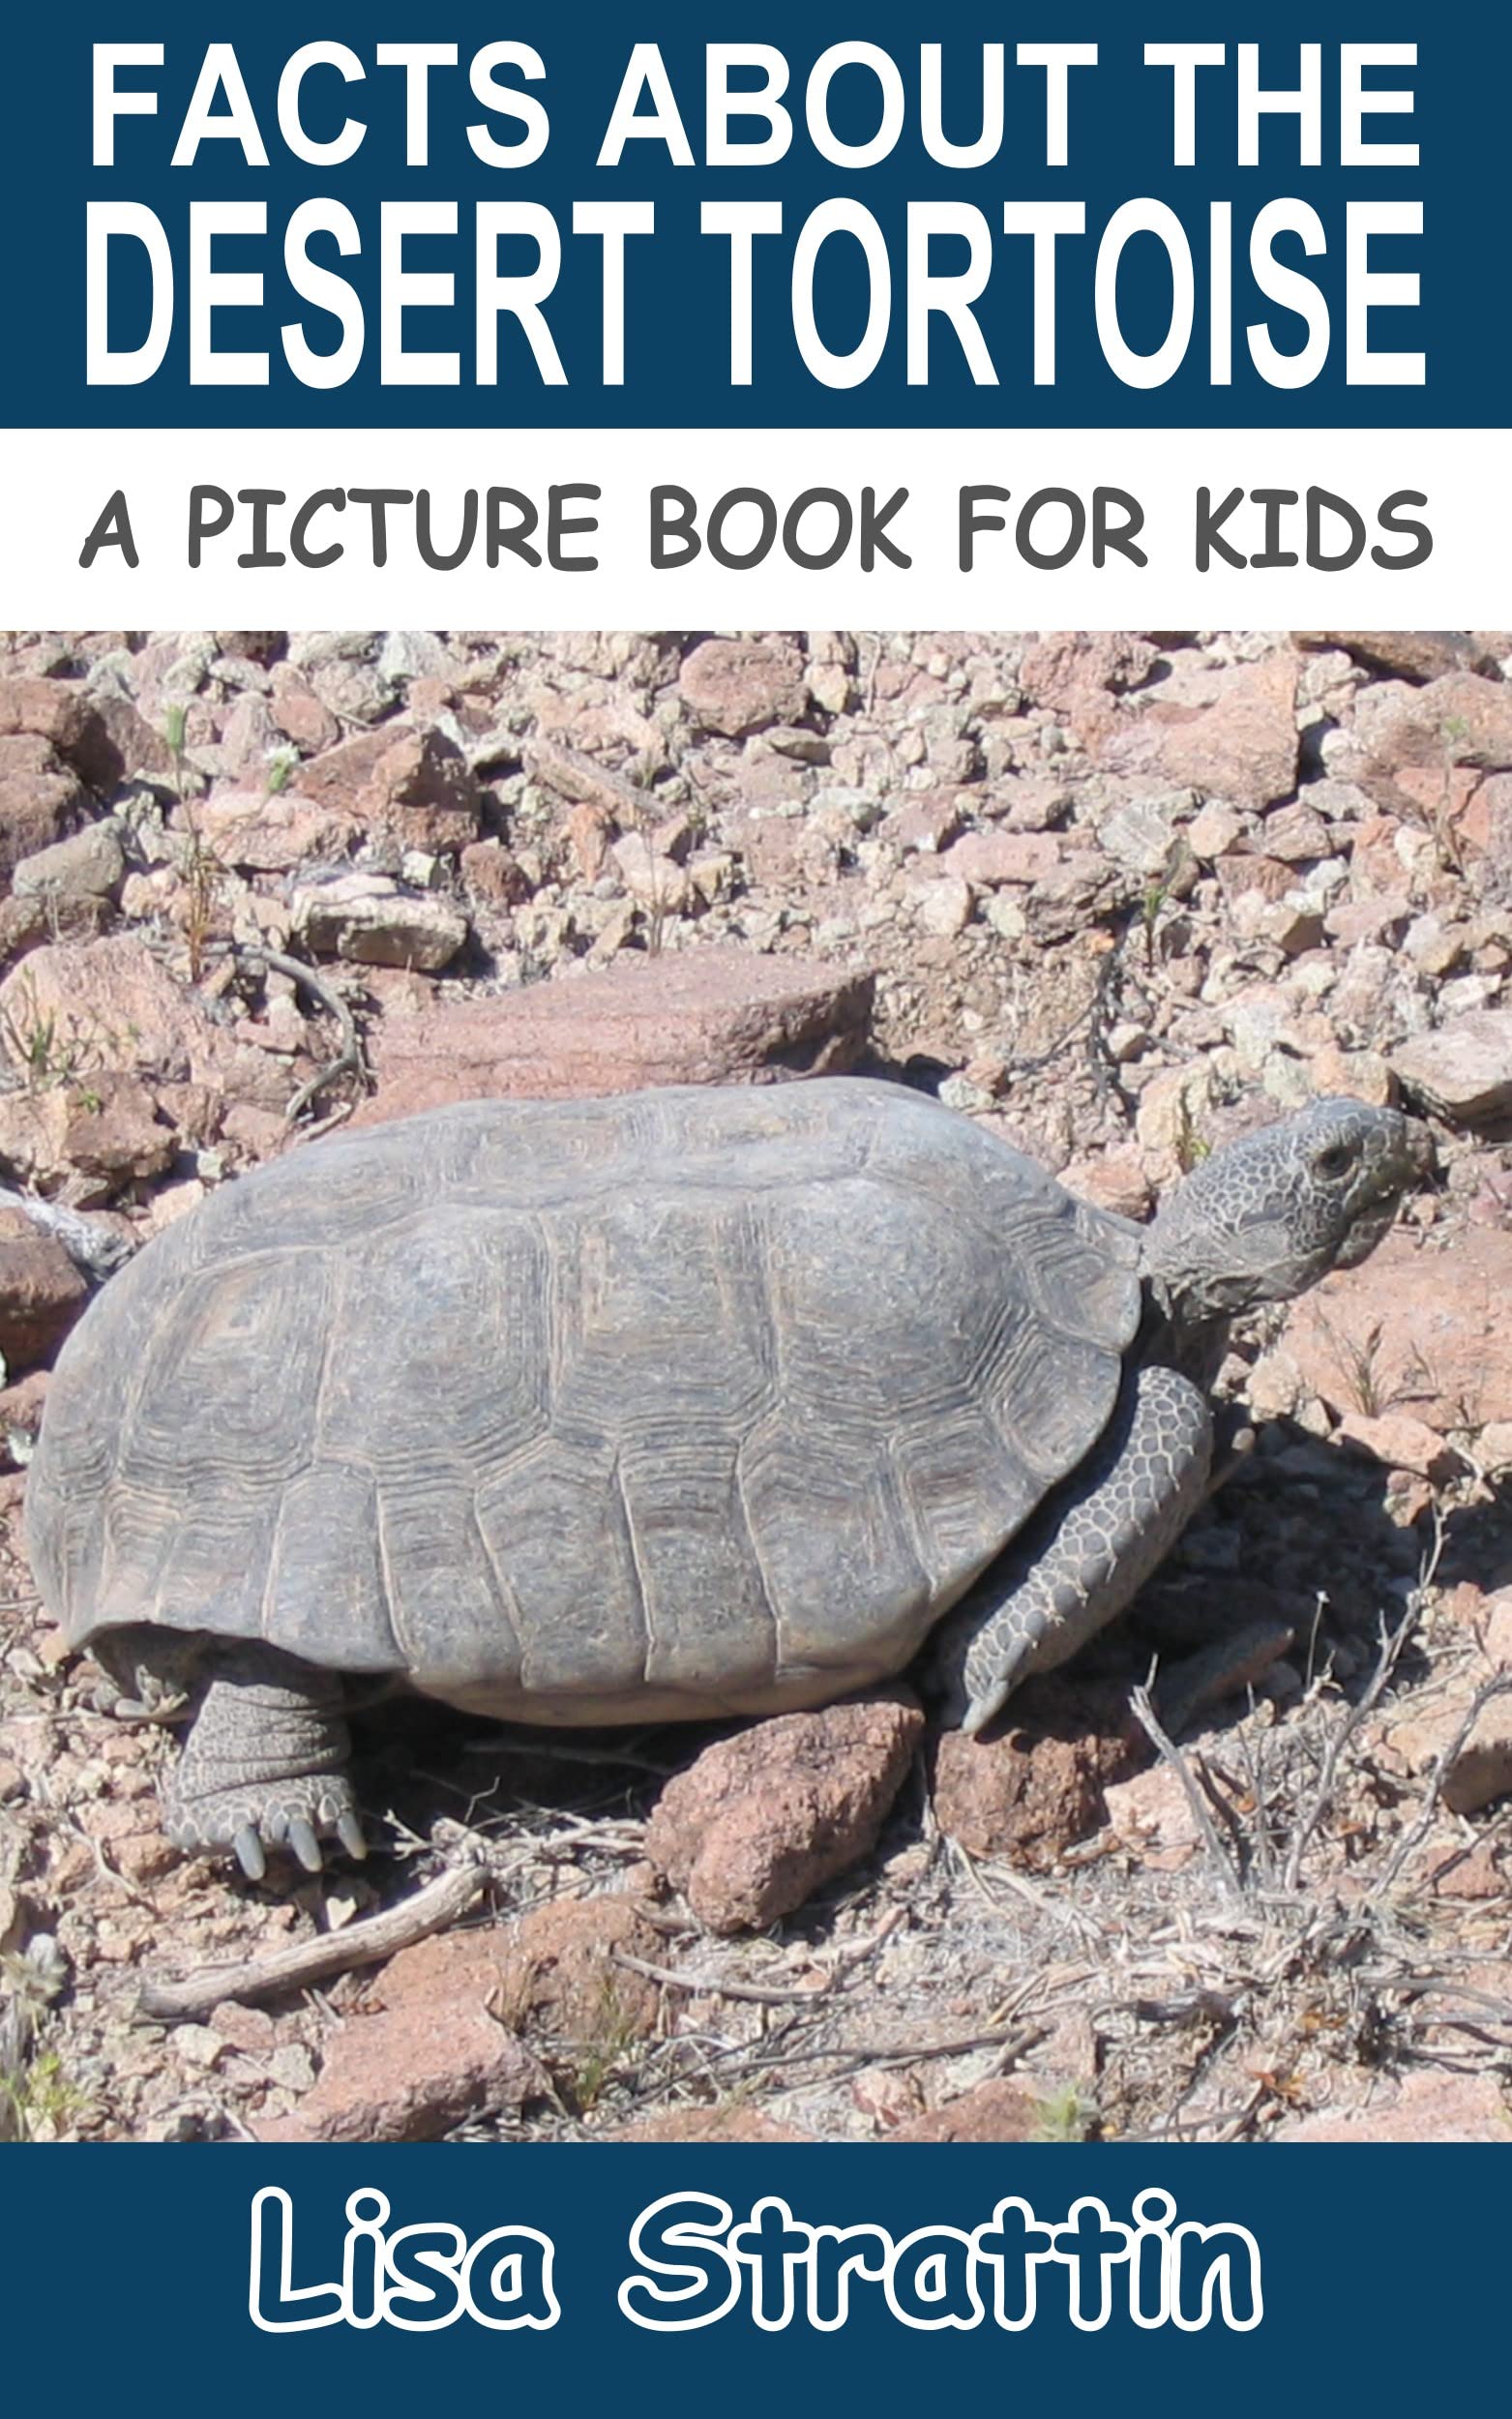 Facts About the Desert Tortoise (A Picture Book For Kids 478)